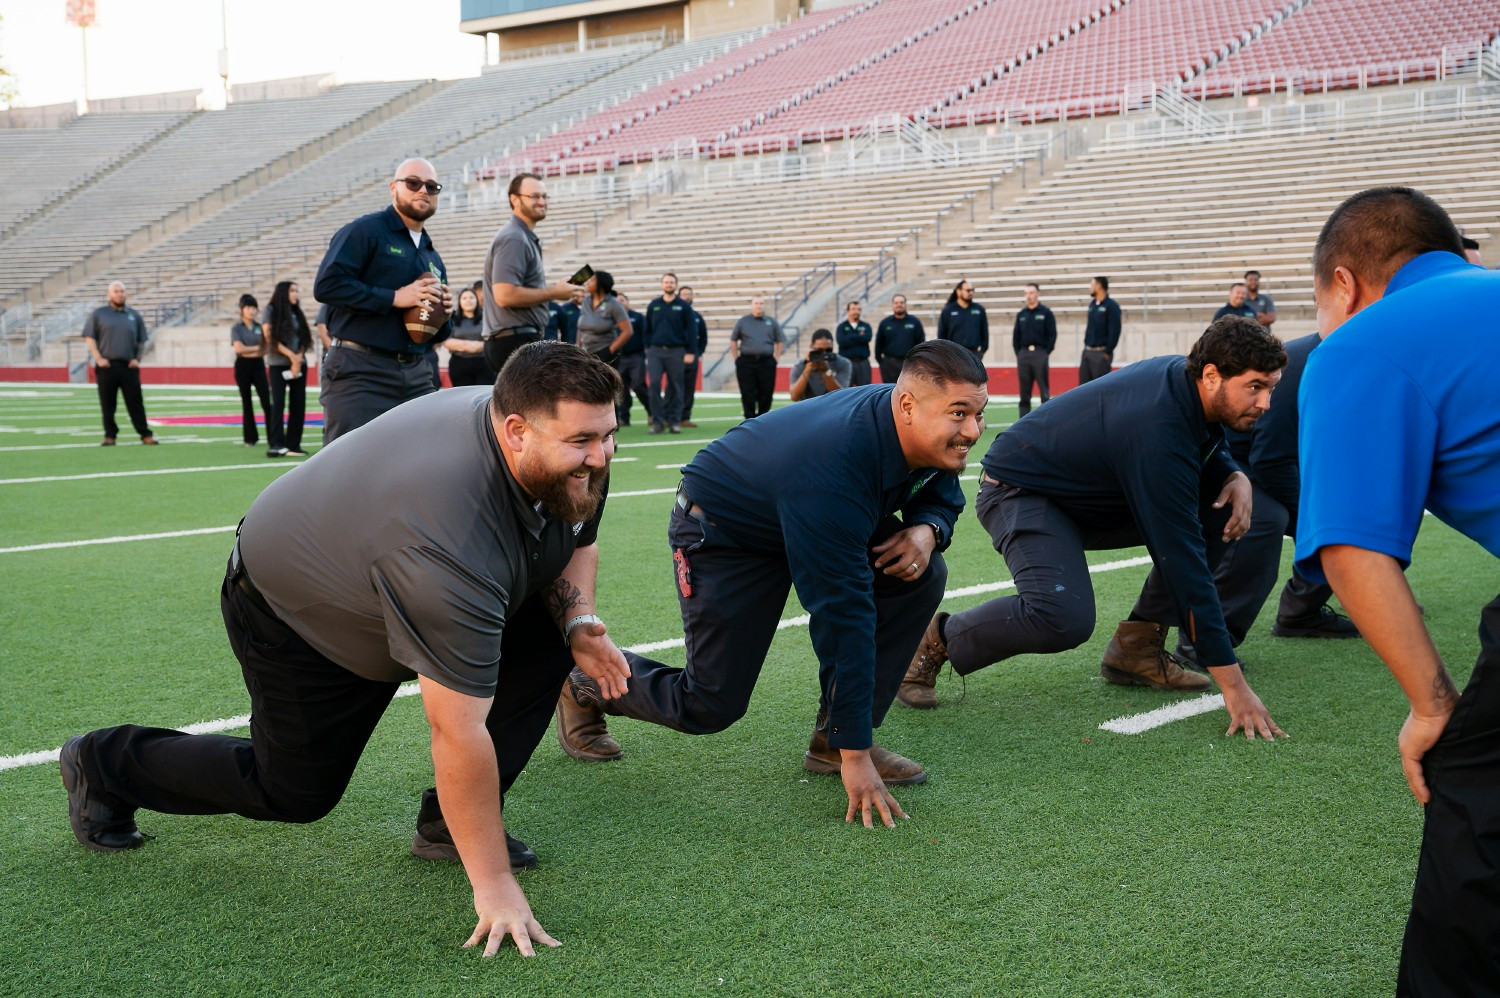 Balanced Comfort team having some fun out on the Fresno State football field.